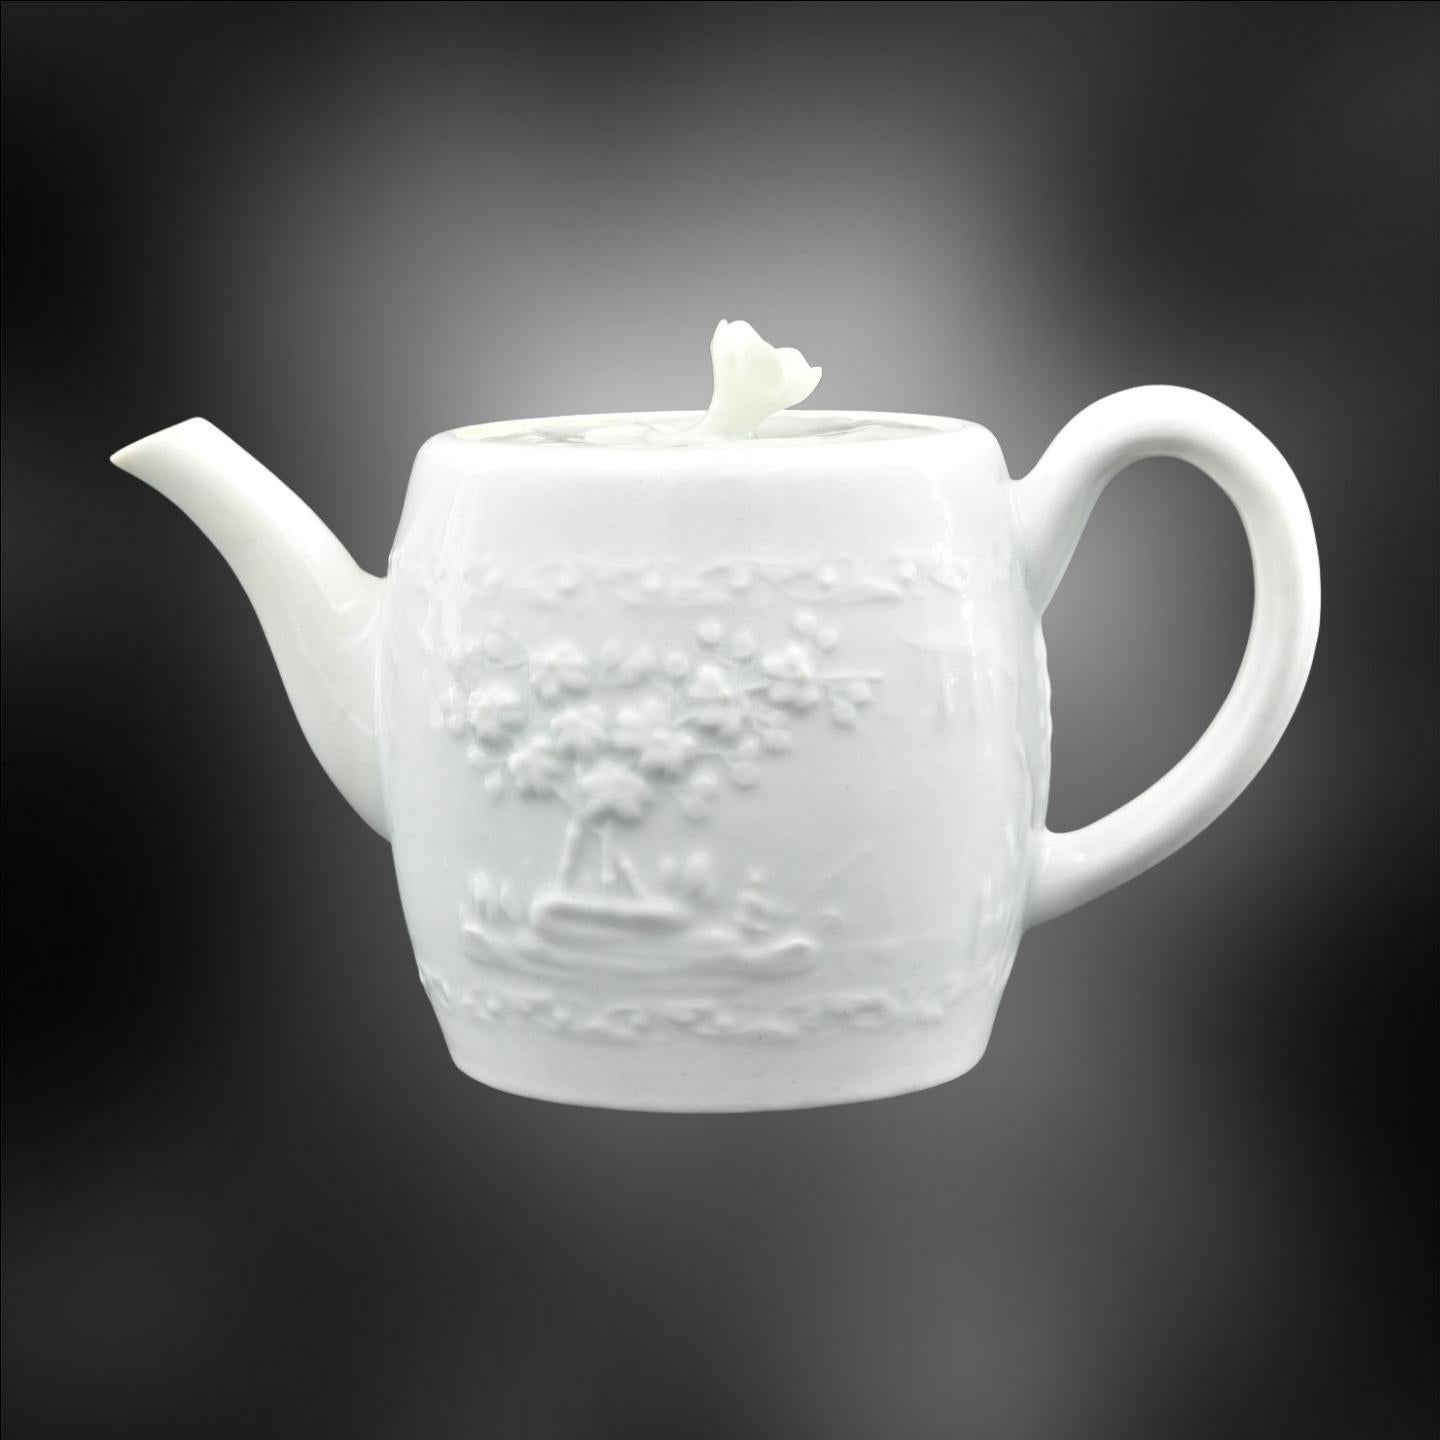 A blanc de chine teapot, with moulded decoration of a fishing scene – considerably rarer than the more common flowers.

Barrel shaped “blanc de chine' teapot with ridged loop handle, and cover with floral knop. Teapot has press-moulded fishing